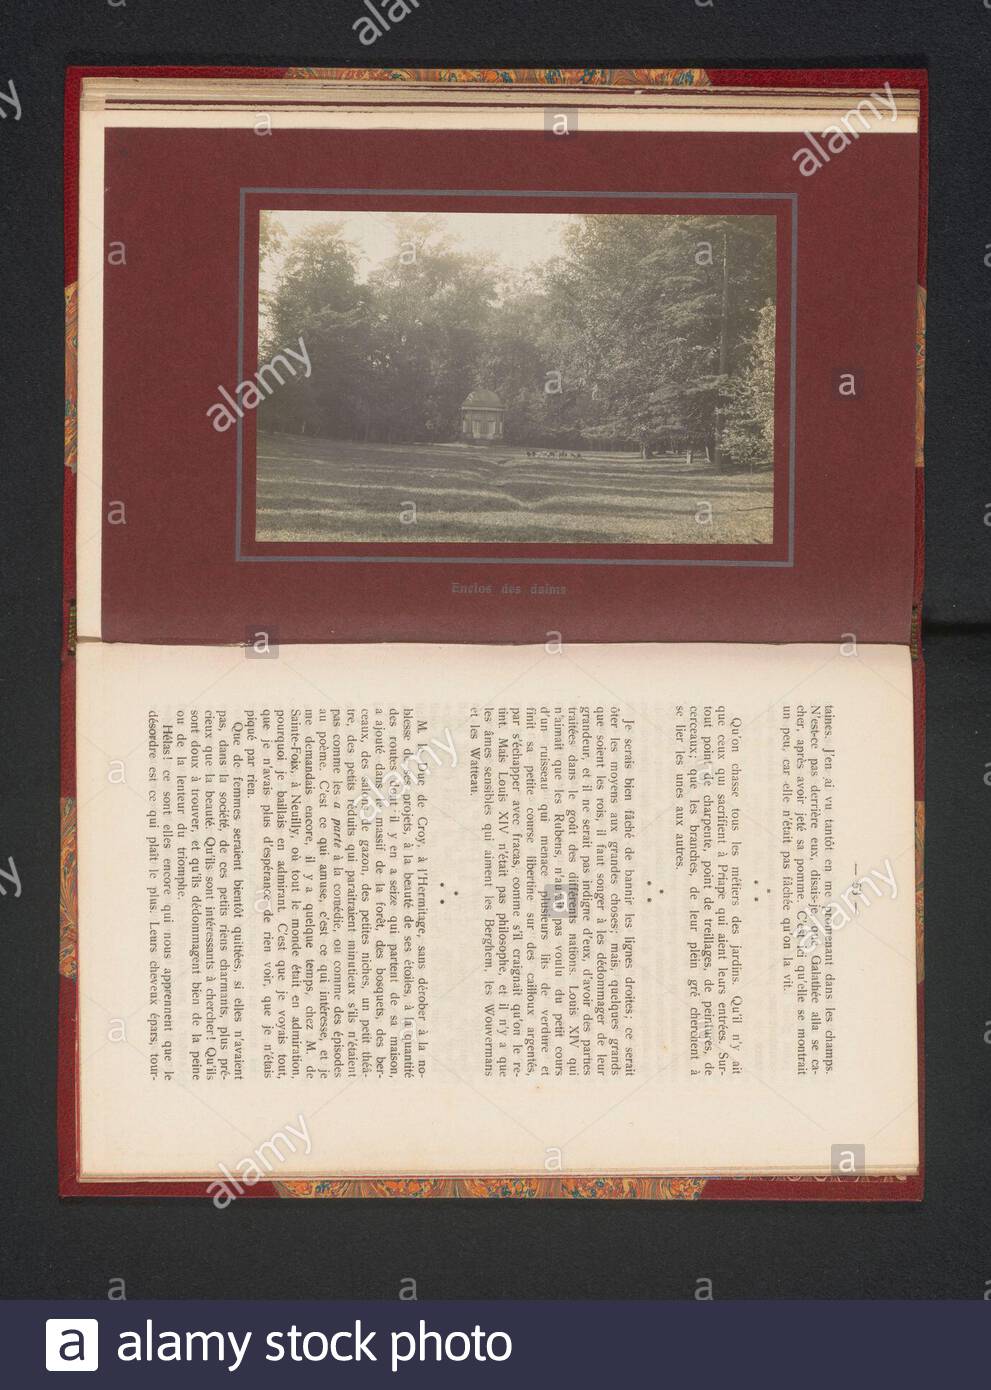 deer stay in the garden of the chteau des beloeilenclos daims title object property type photo page item number rp f 2001 7 1263 8 manufacturer photographer coppin goisseplaats manufacture beloeil dating c1903 or for 1908 material paper technique gelatin silver print dimensions photo h 80 mm w 126 mmtoelichtingfoto front page 53 subject hoofed animals deer fence wall paling where beloeil chteau dever recruitment and legal 2B6TFKG